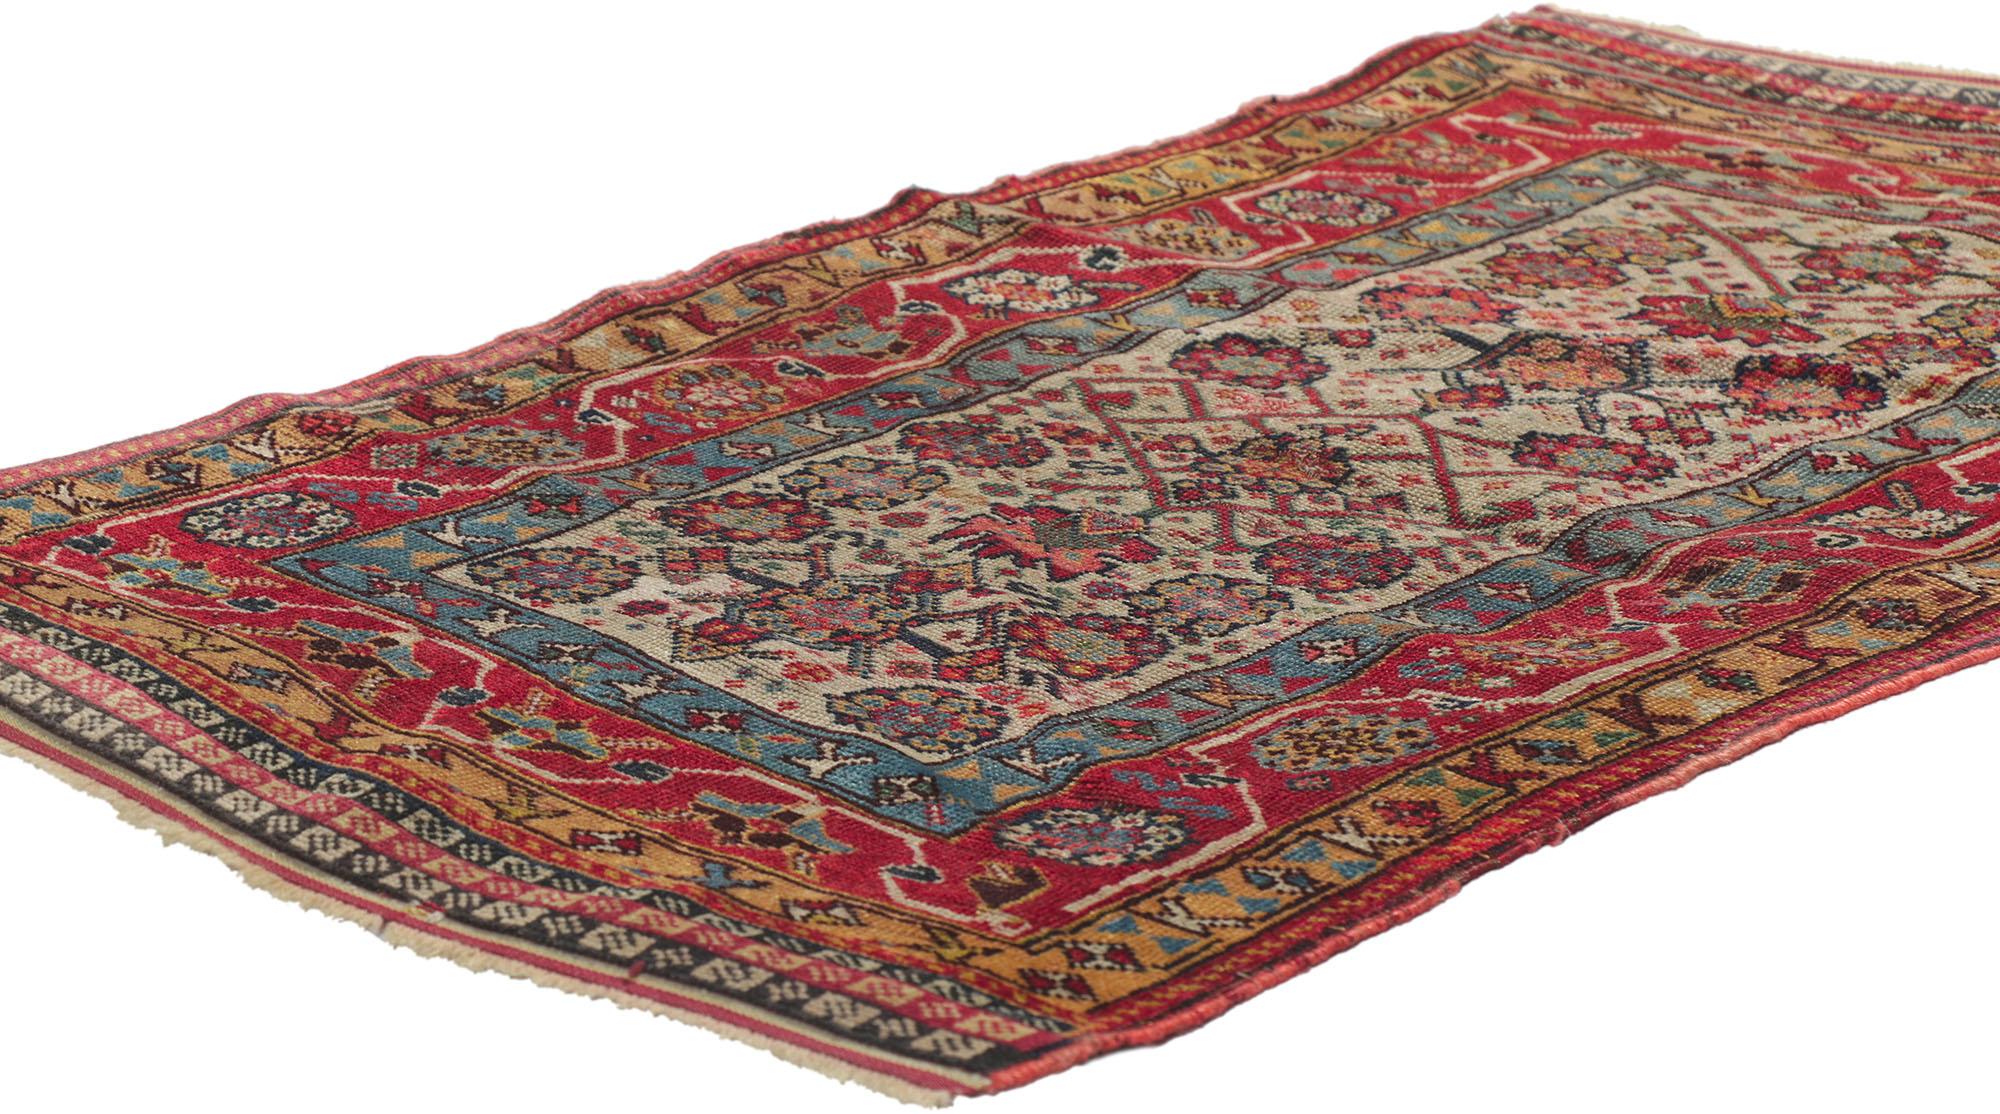 ?78158 Antique Persian Gashghaie rug, 02'00 x 03'09.
?Rendered in variegated shades of beige, red, sky blue, black, brown, raspberry pink, cerulean, and verdigris with other accent colors.
Desirable Age Wear. Abrash.
Hand knotted wool.
Made in